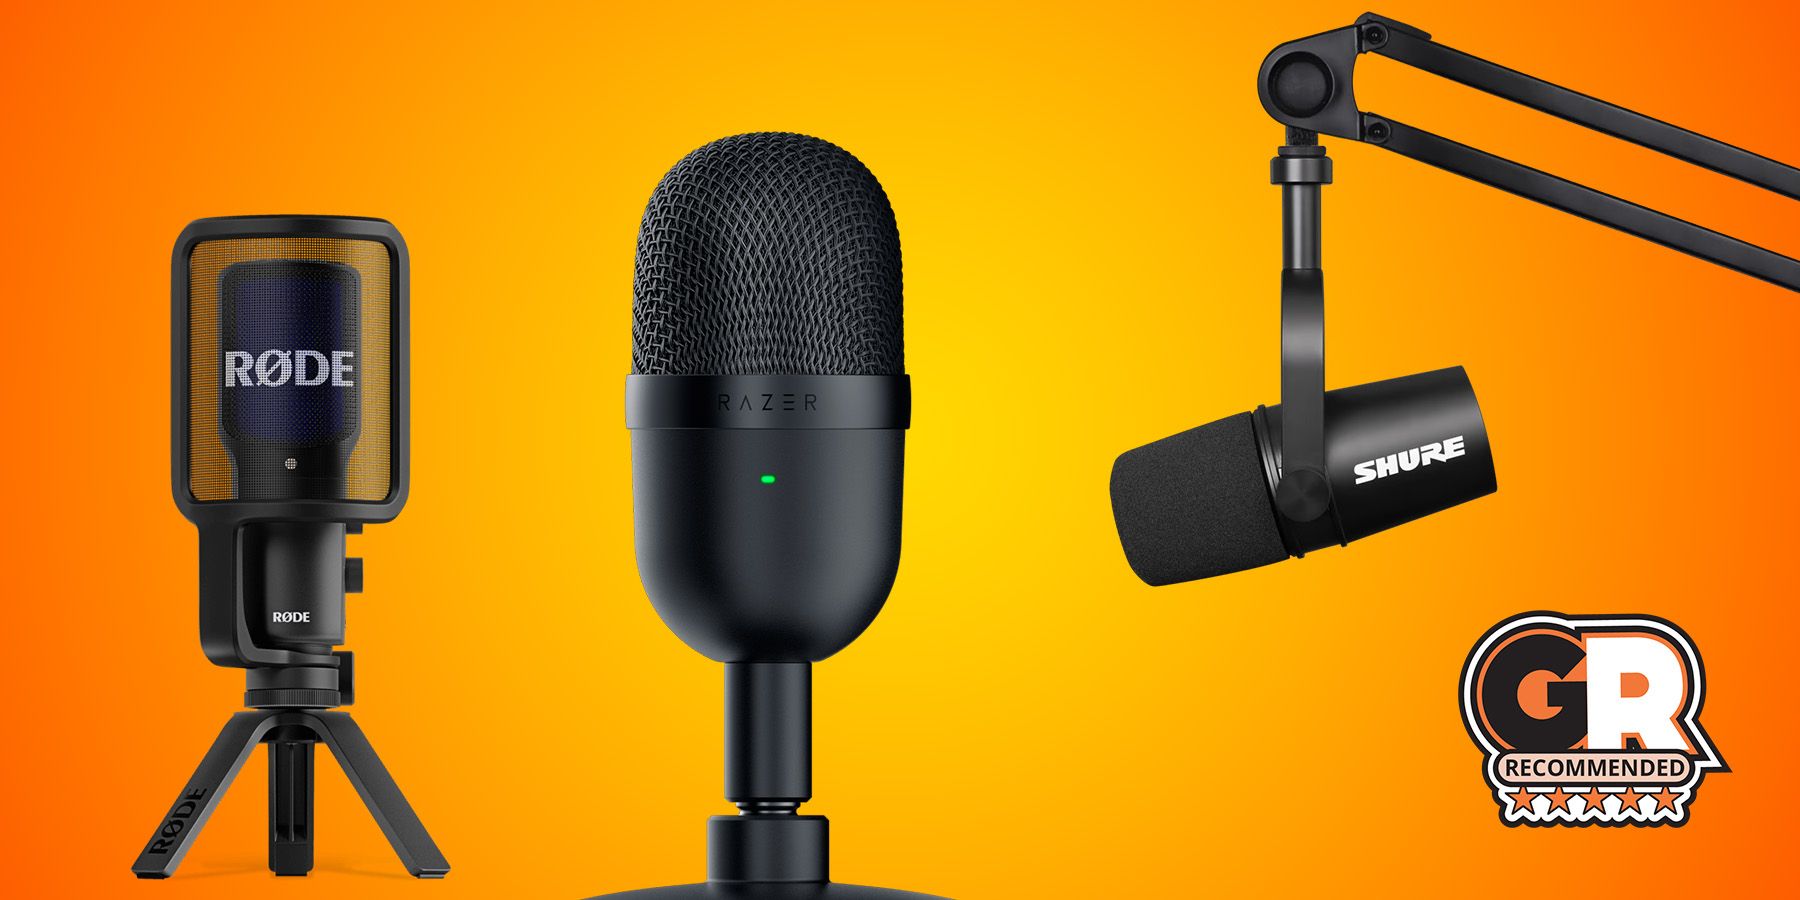 Shure MV7 review: An 'almost perfect' hybrid mic for podcasters and  streamers